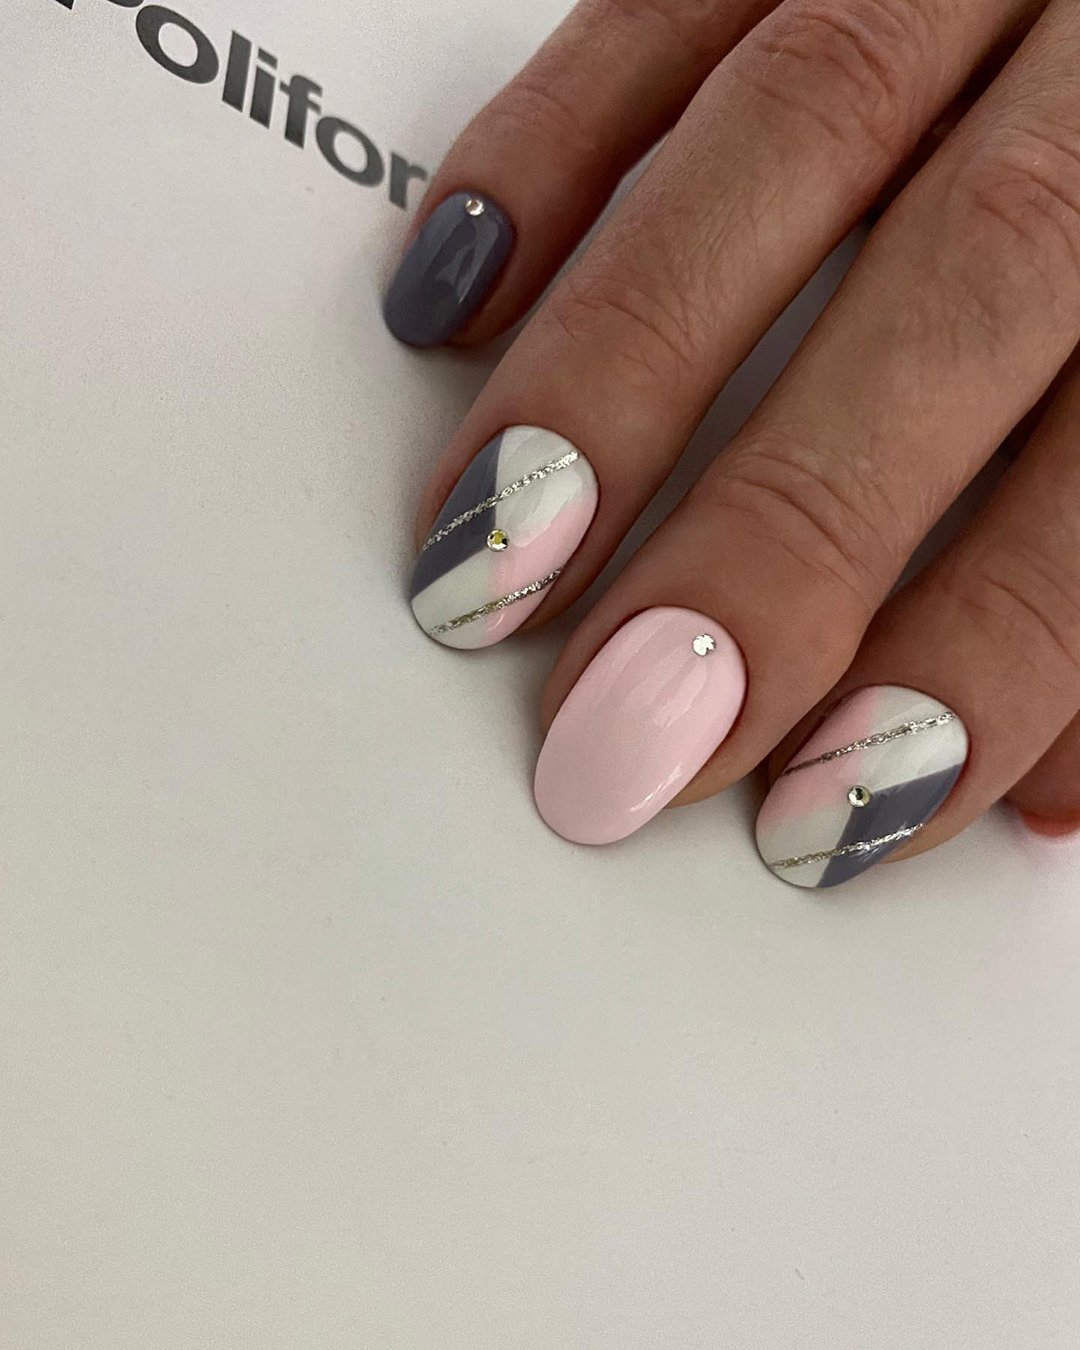 pinterest nails for wedding pink grey with silver glitter stripes laura_nails_studio